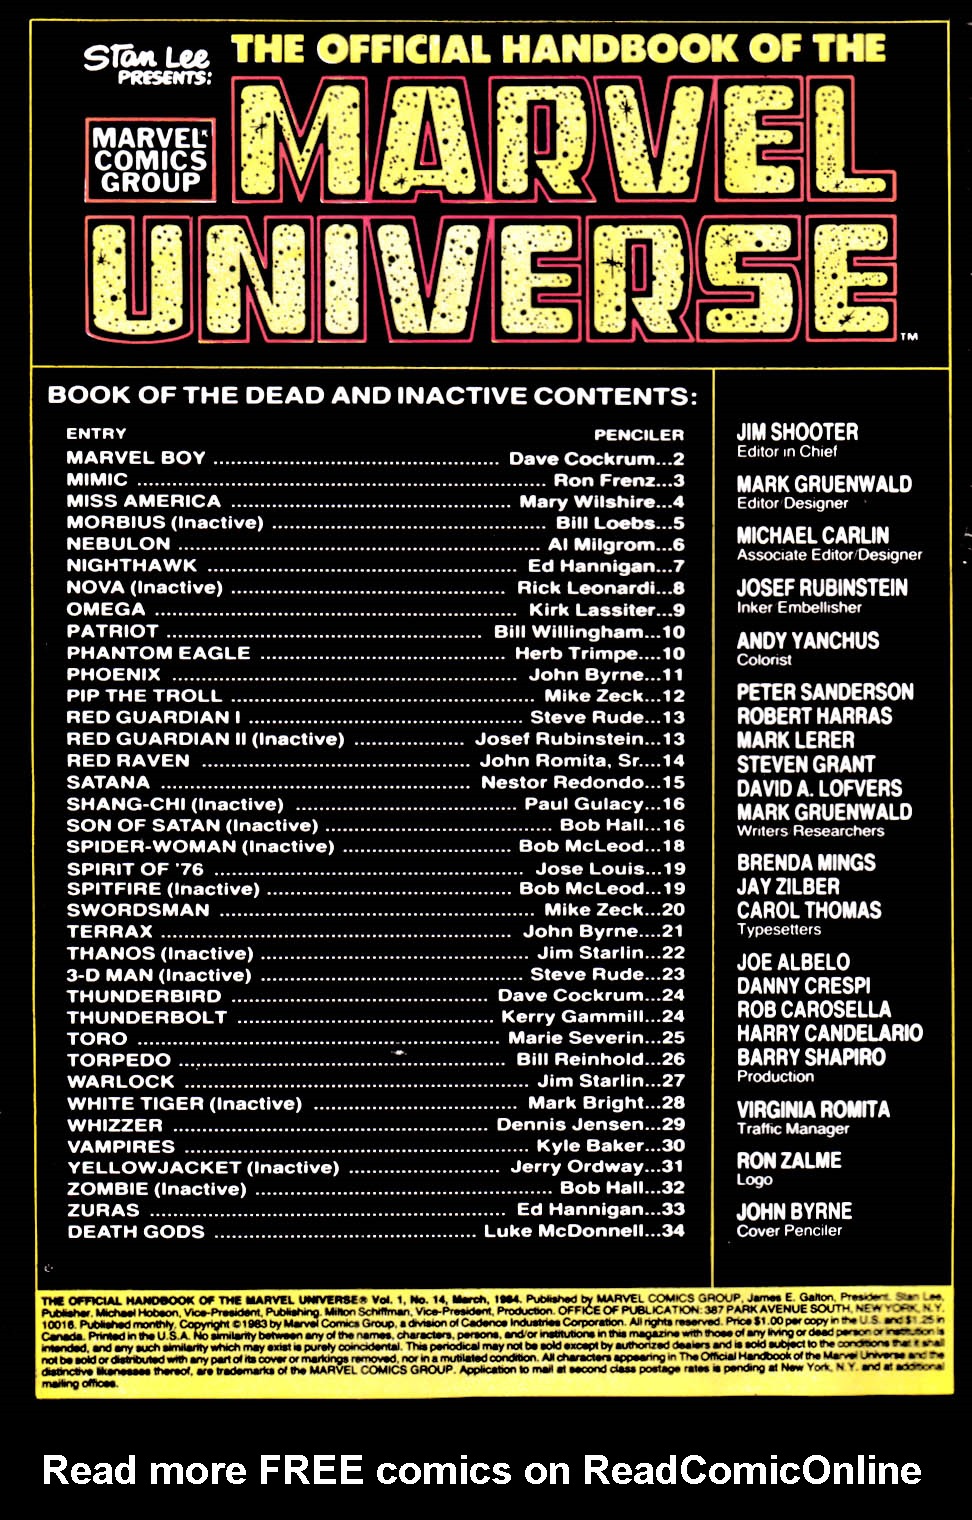 Read online The Official Handbook of the Marvel Universe comic -  Issue #14 - 2